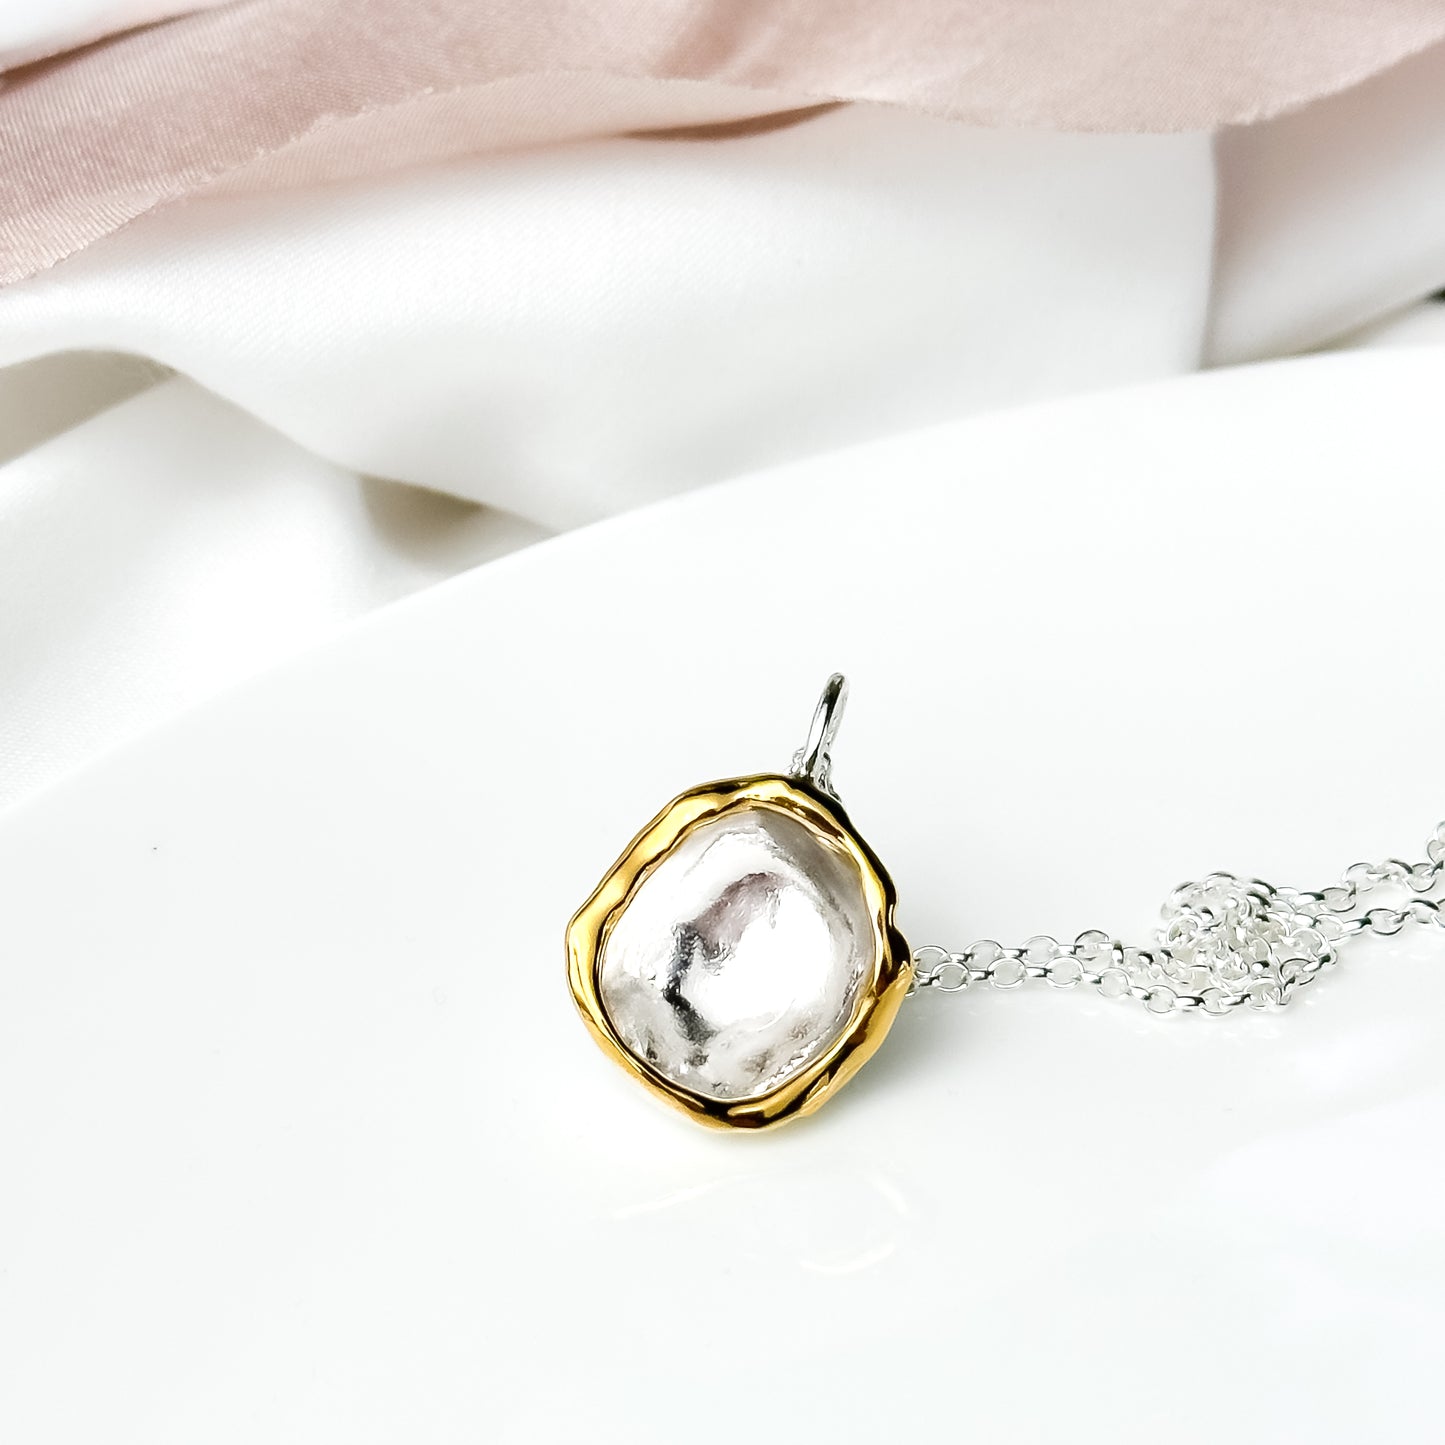 Silver and Gold Water Droplet Necklace